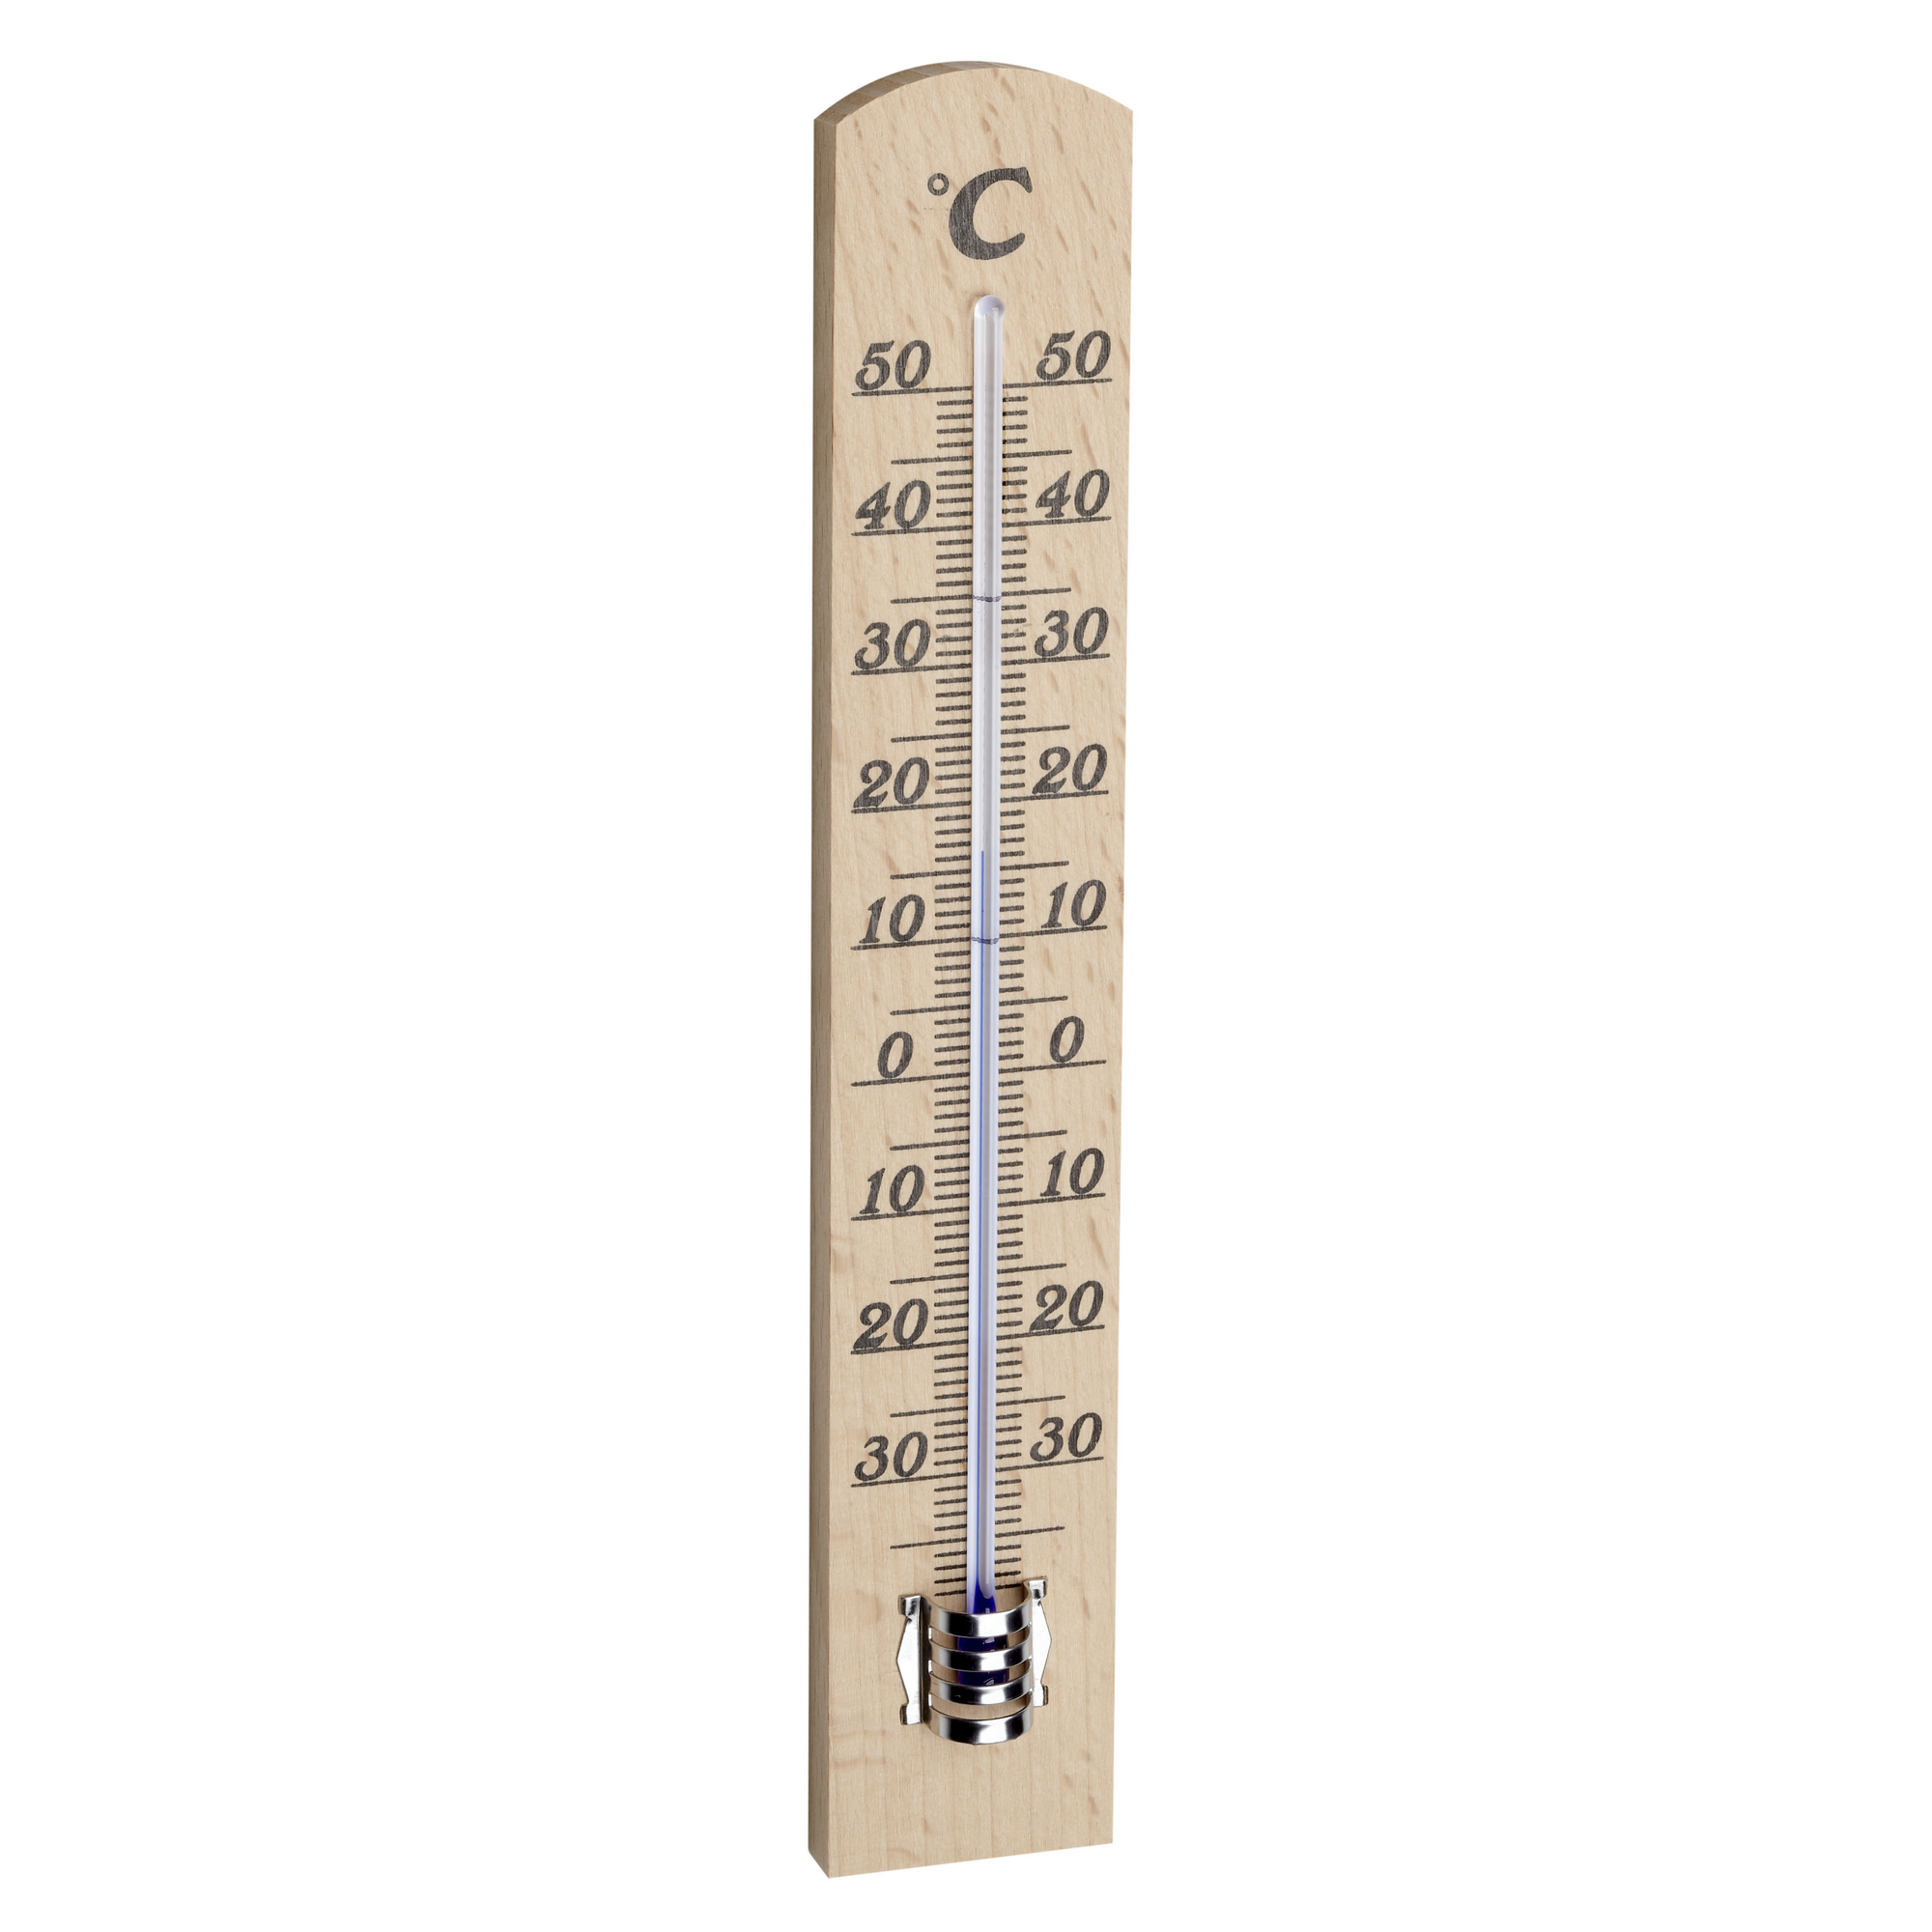 Innenthermometer Holz buchefarben 3,1 x 1,6 x 18 cm + product picture